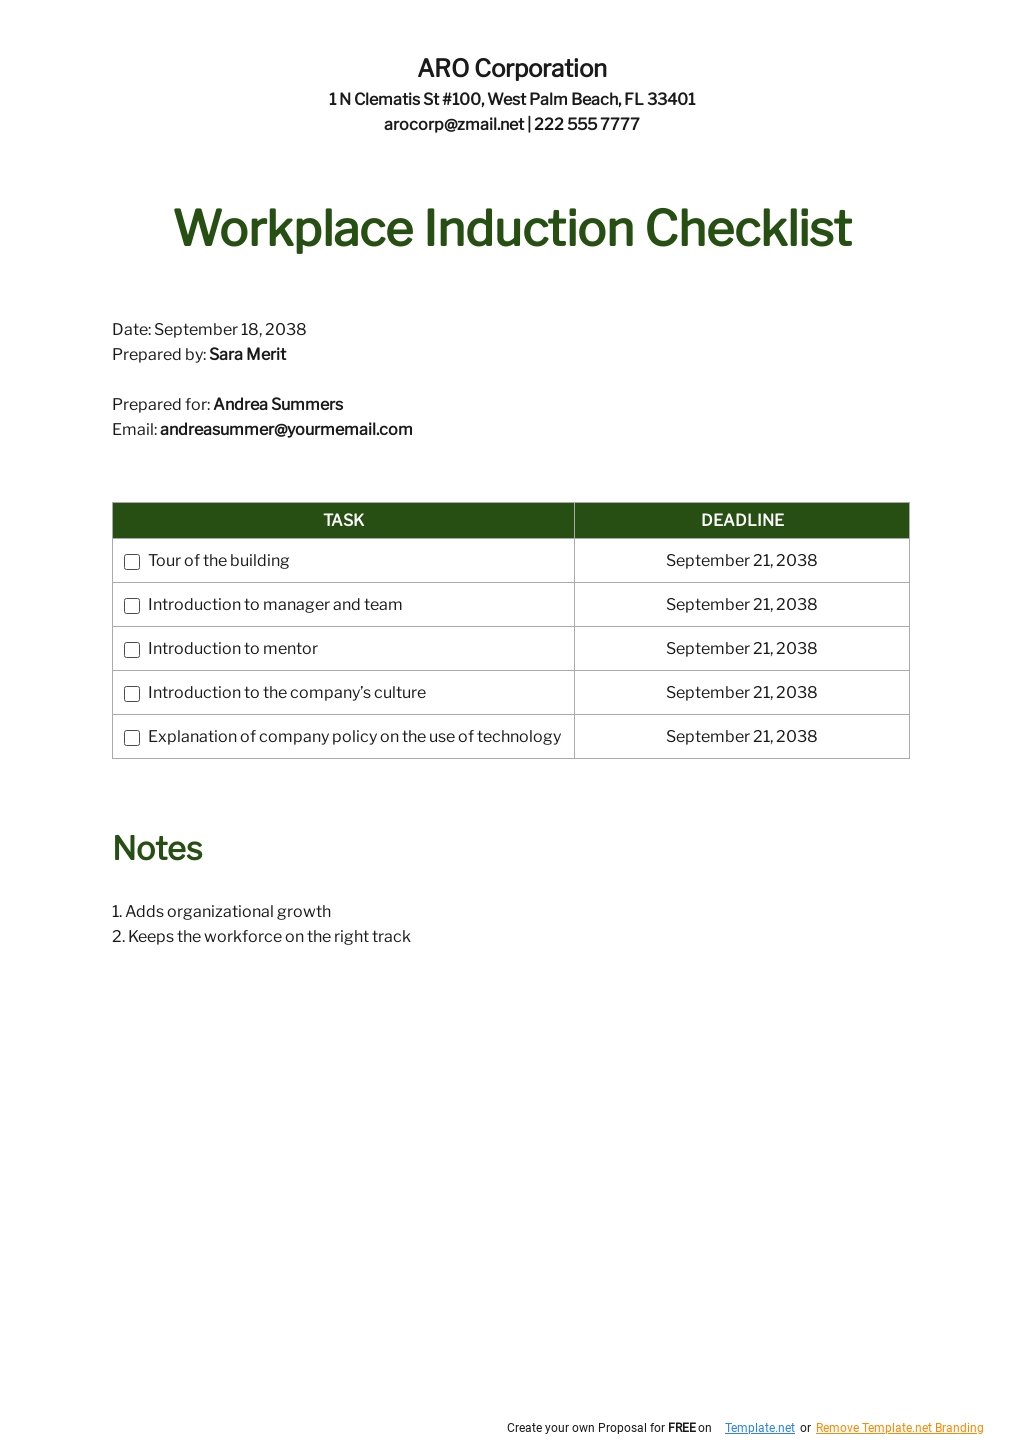 Workplace Induction Checklist Template